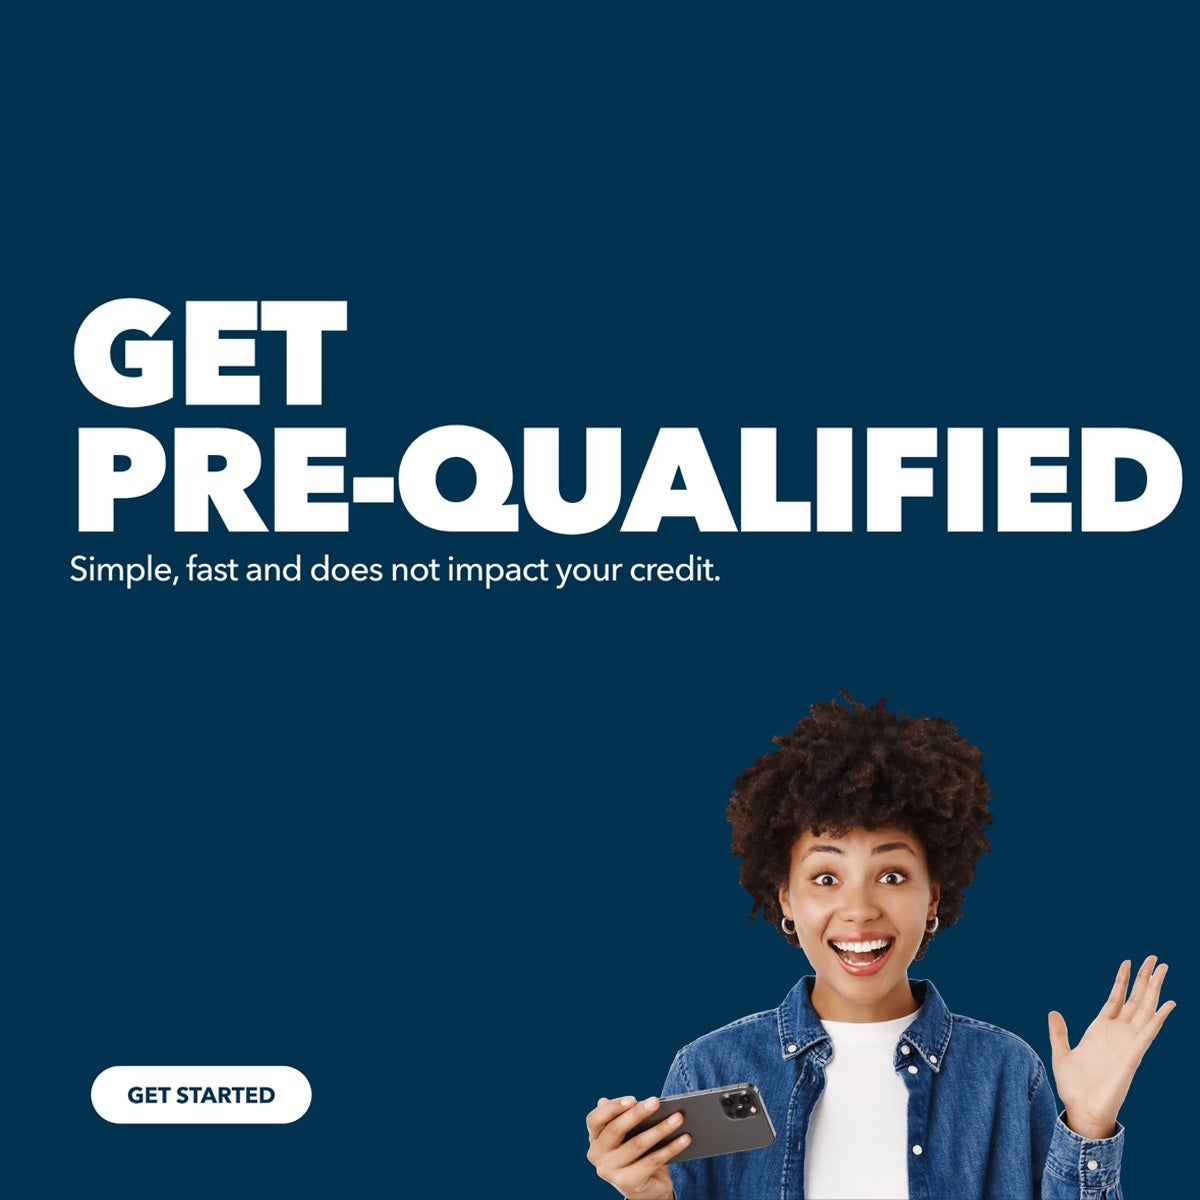 Get Pre-qualified